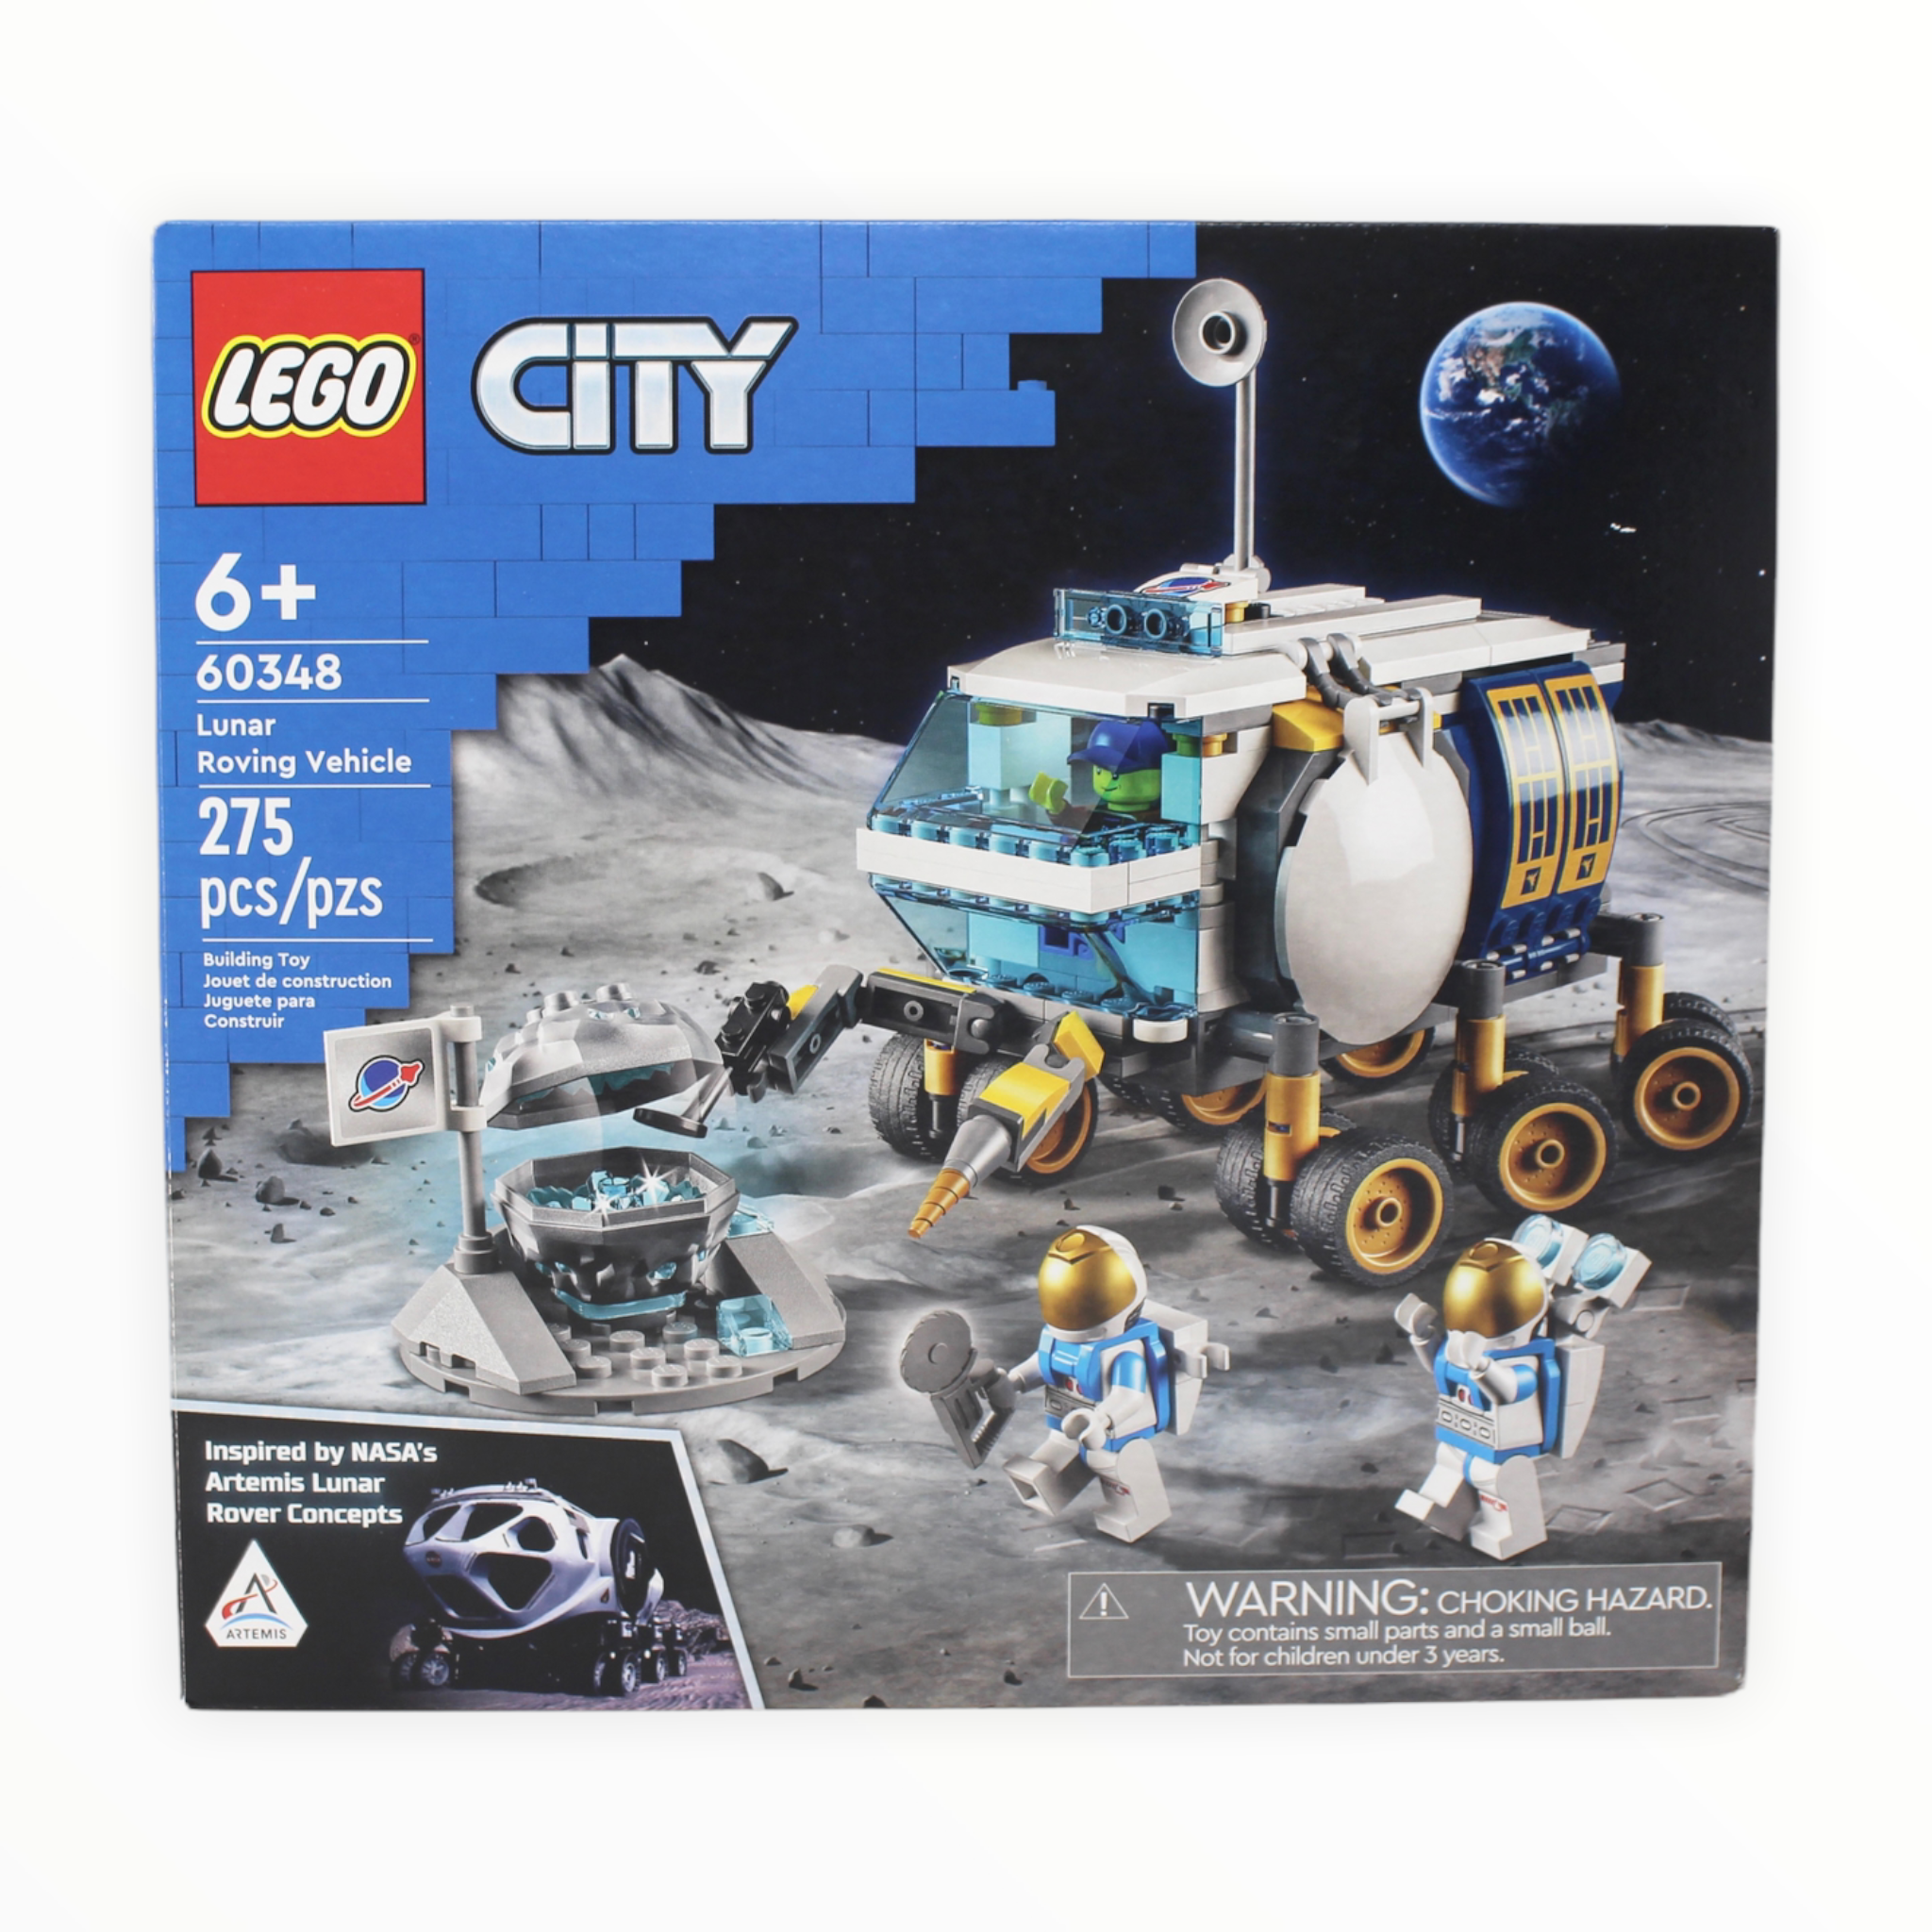 Certified Used Set 60348 City Lunar Roving Vehicle